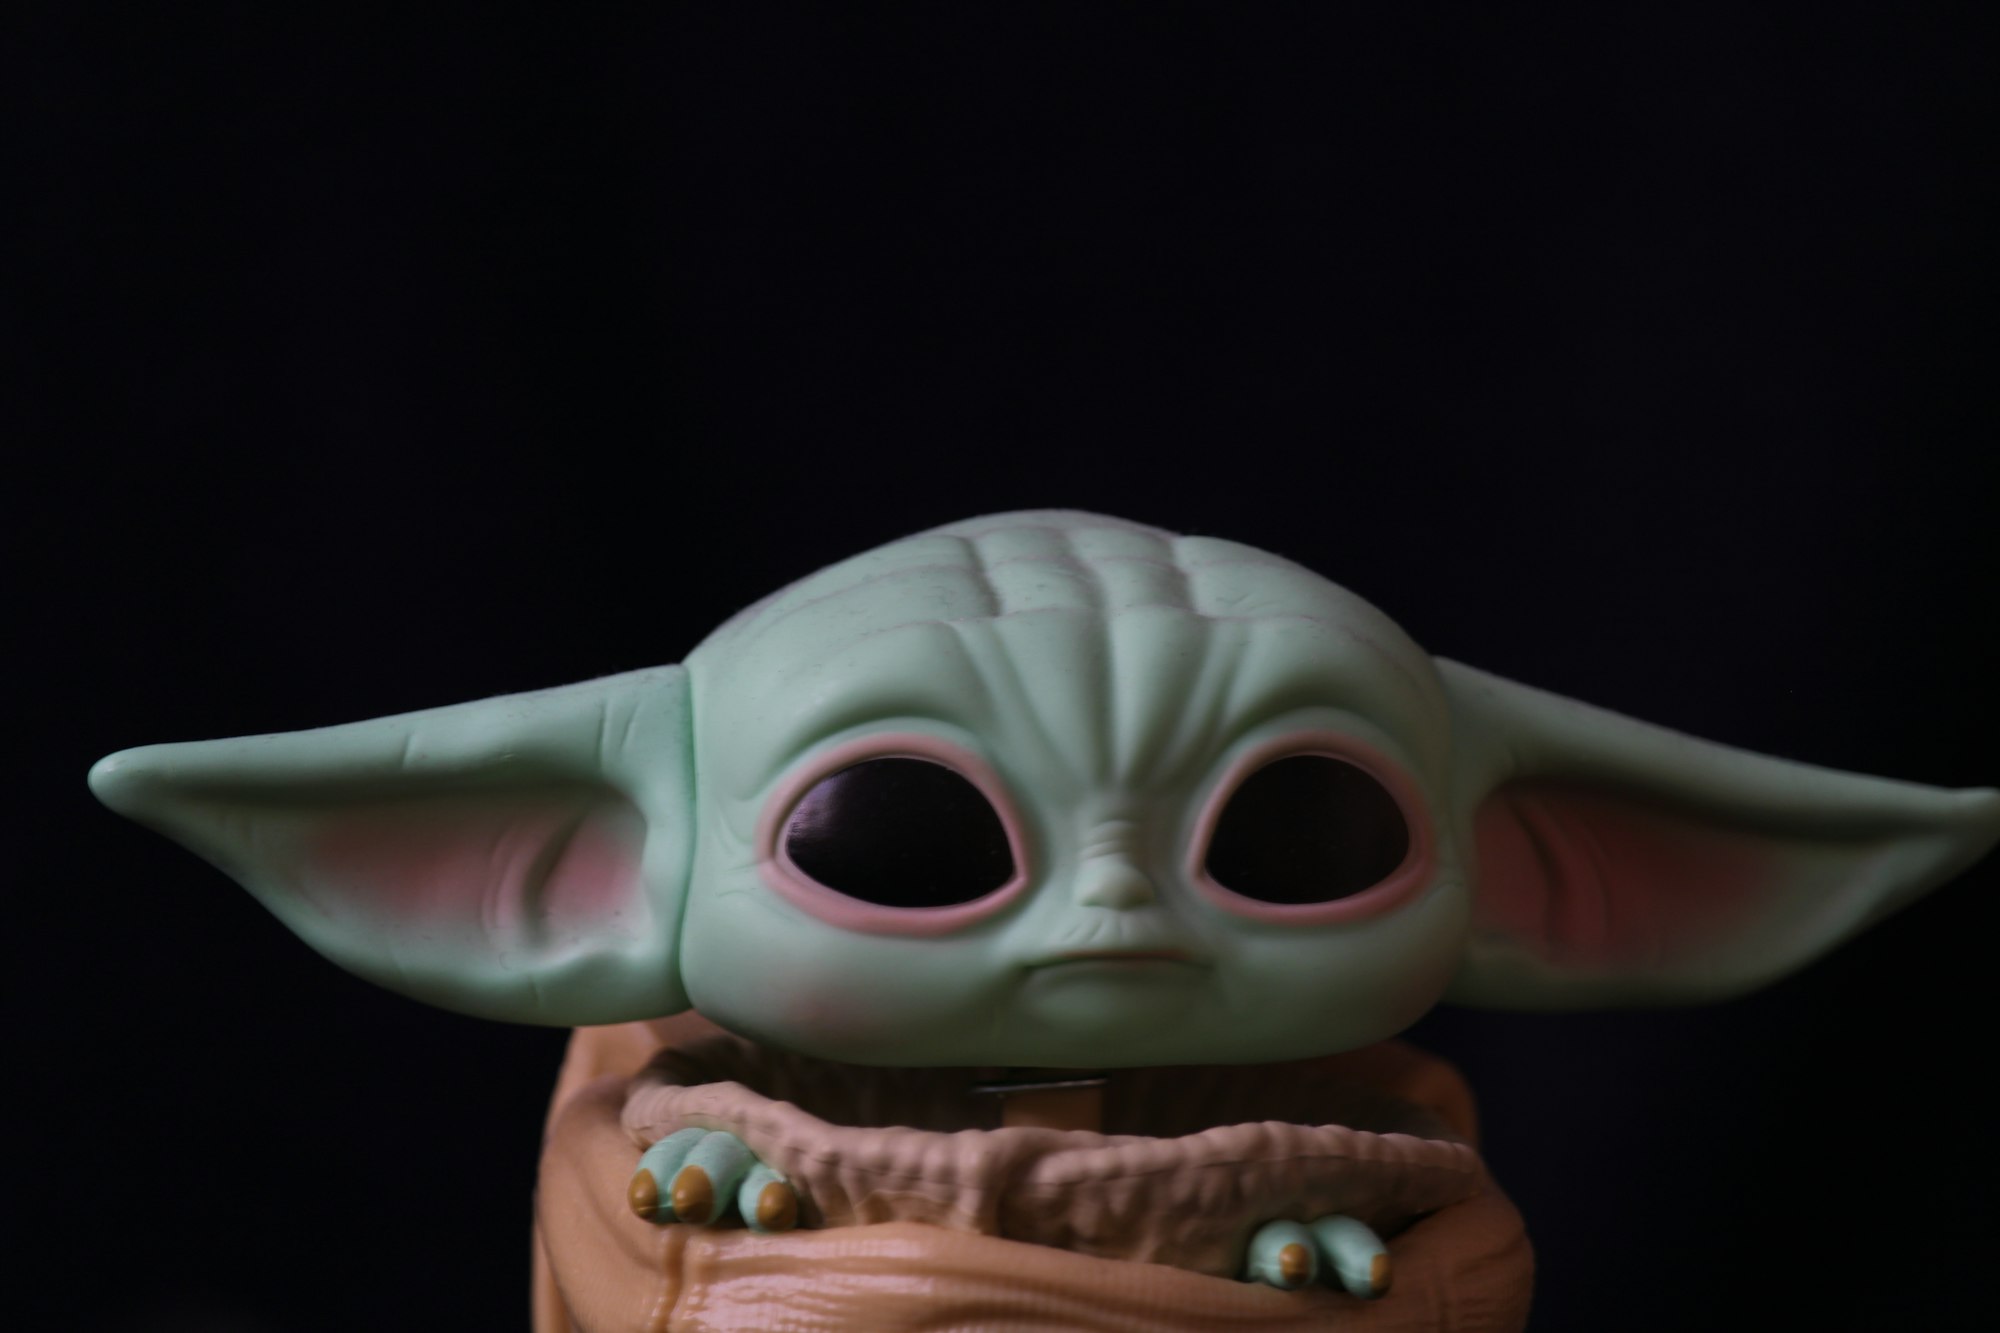 Figure of a popular green alien character with large ears and eyes, against a dark background.